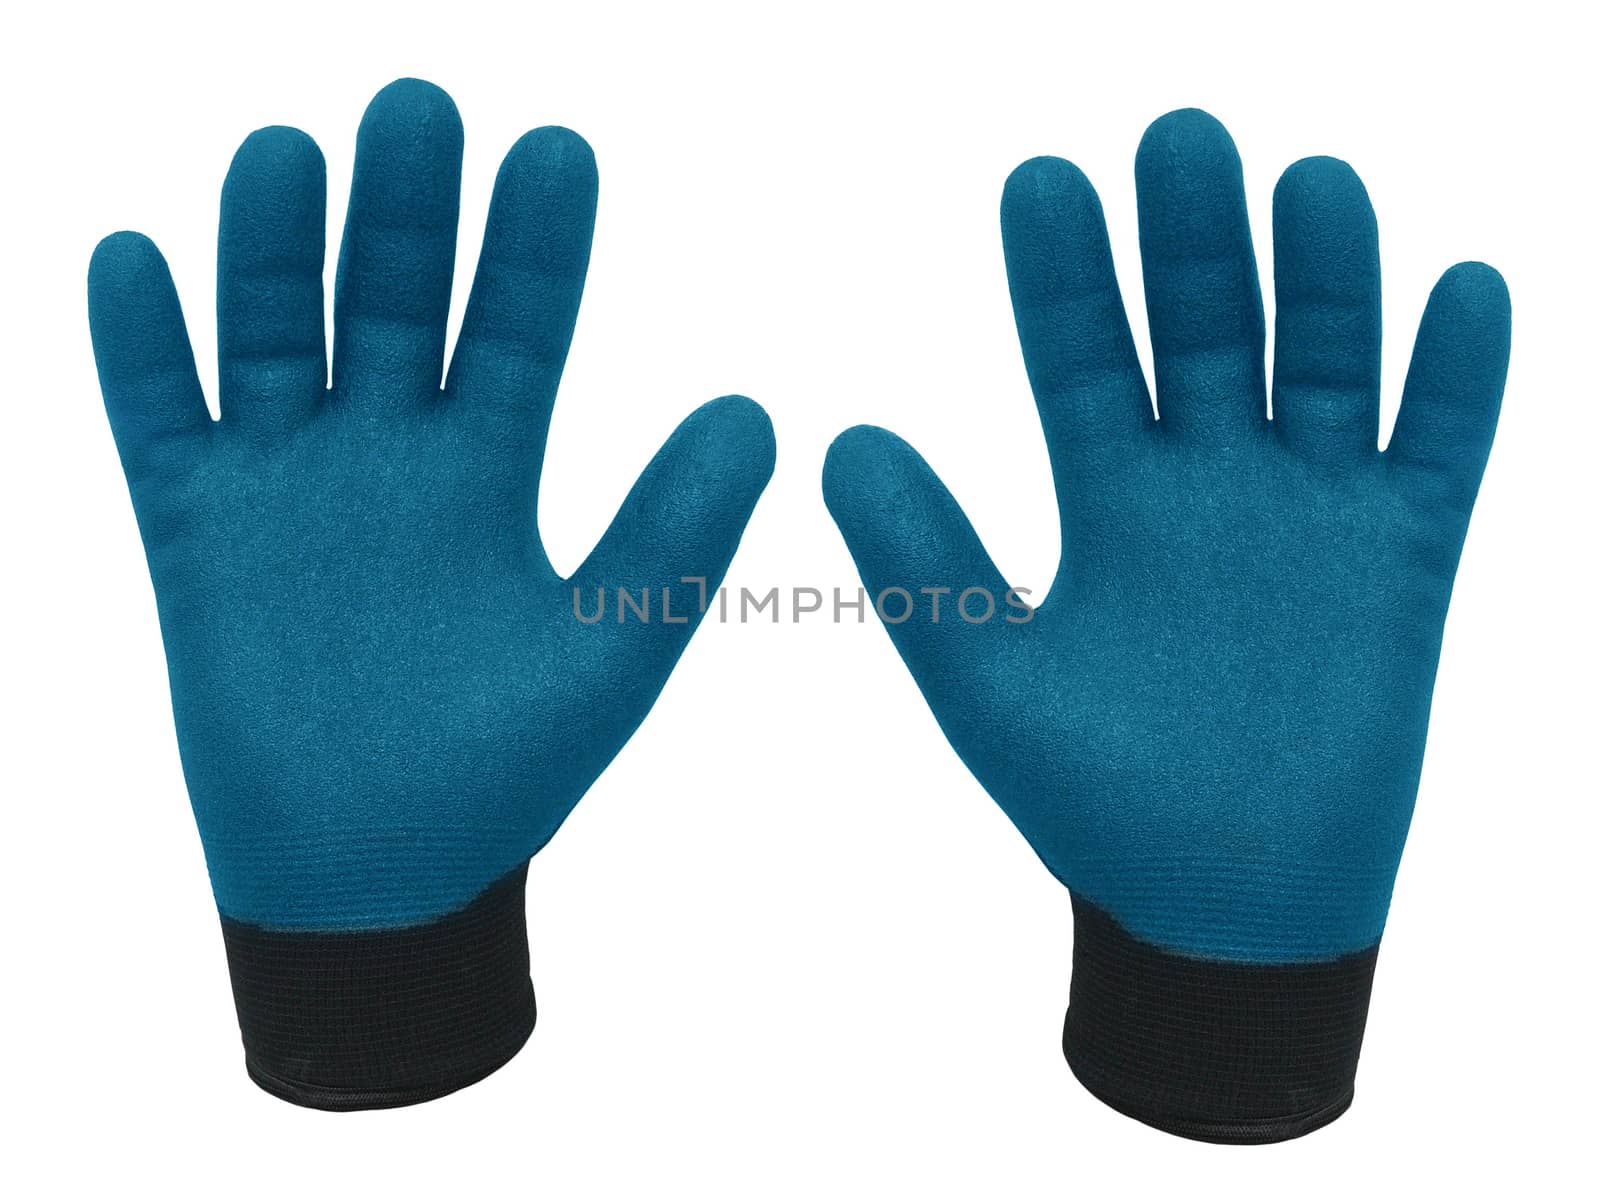 Pair Of Gloves For Heavy Duty Job by ozaiachin